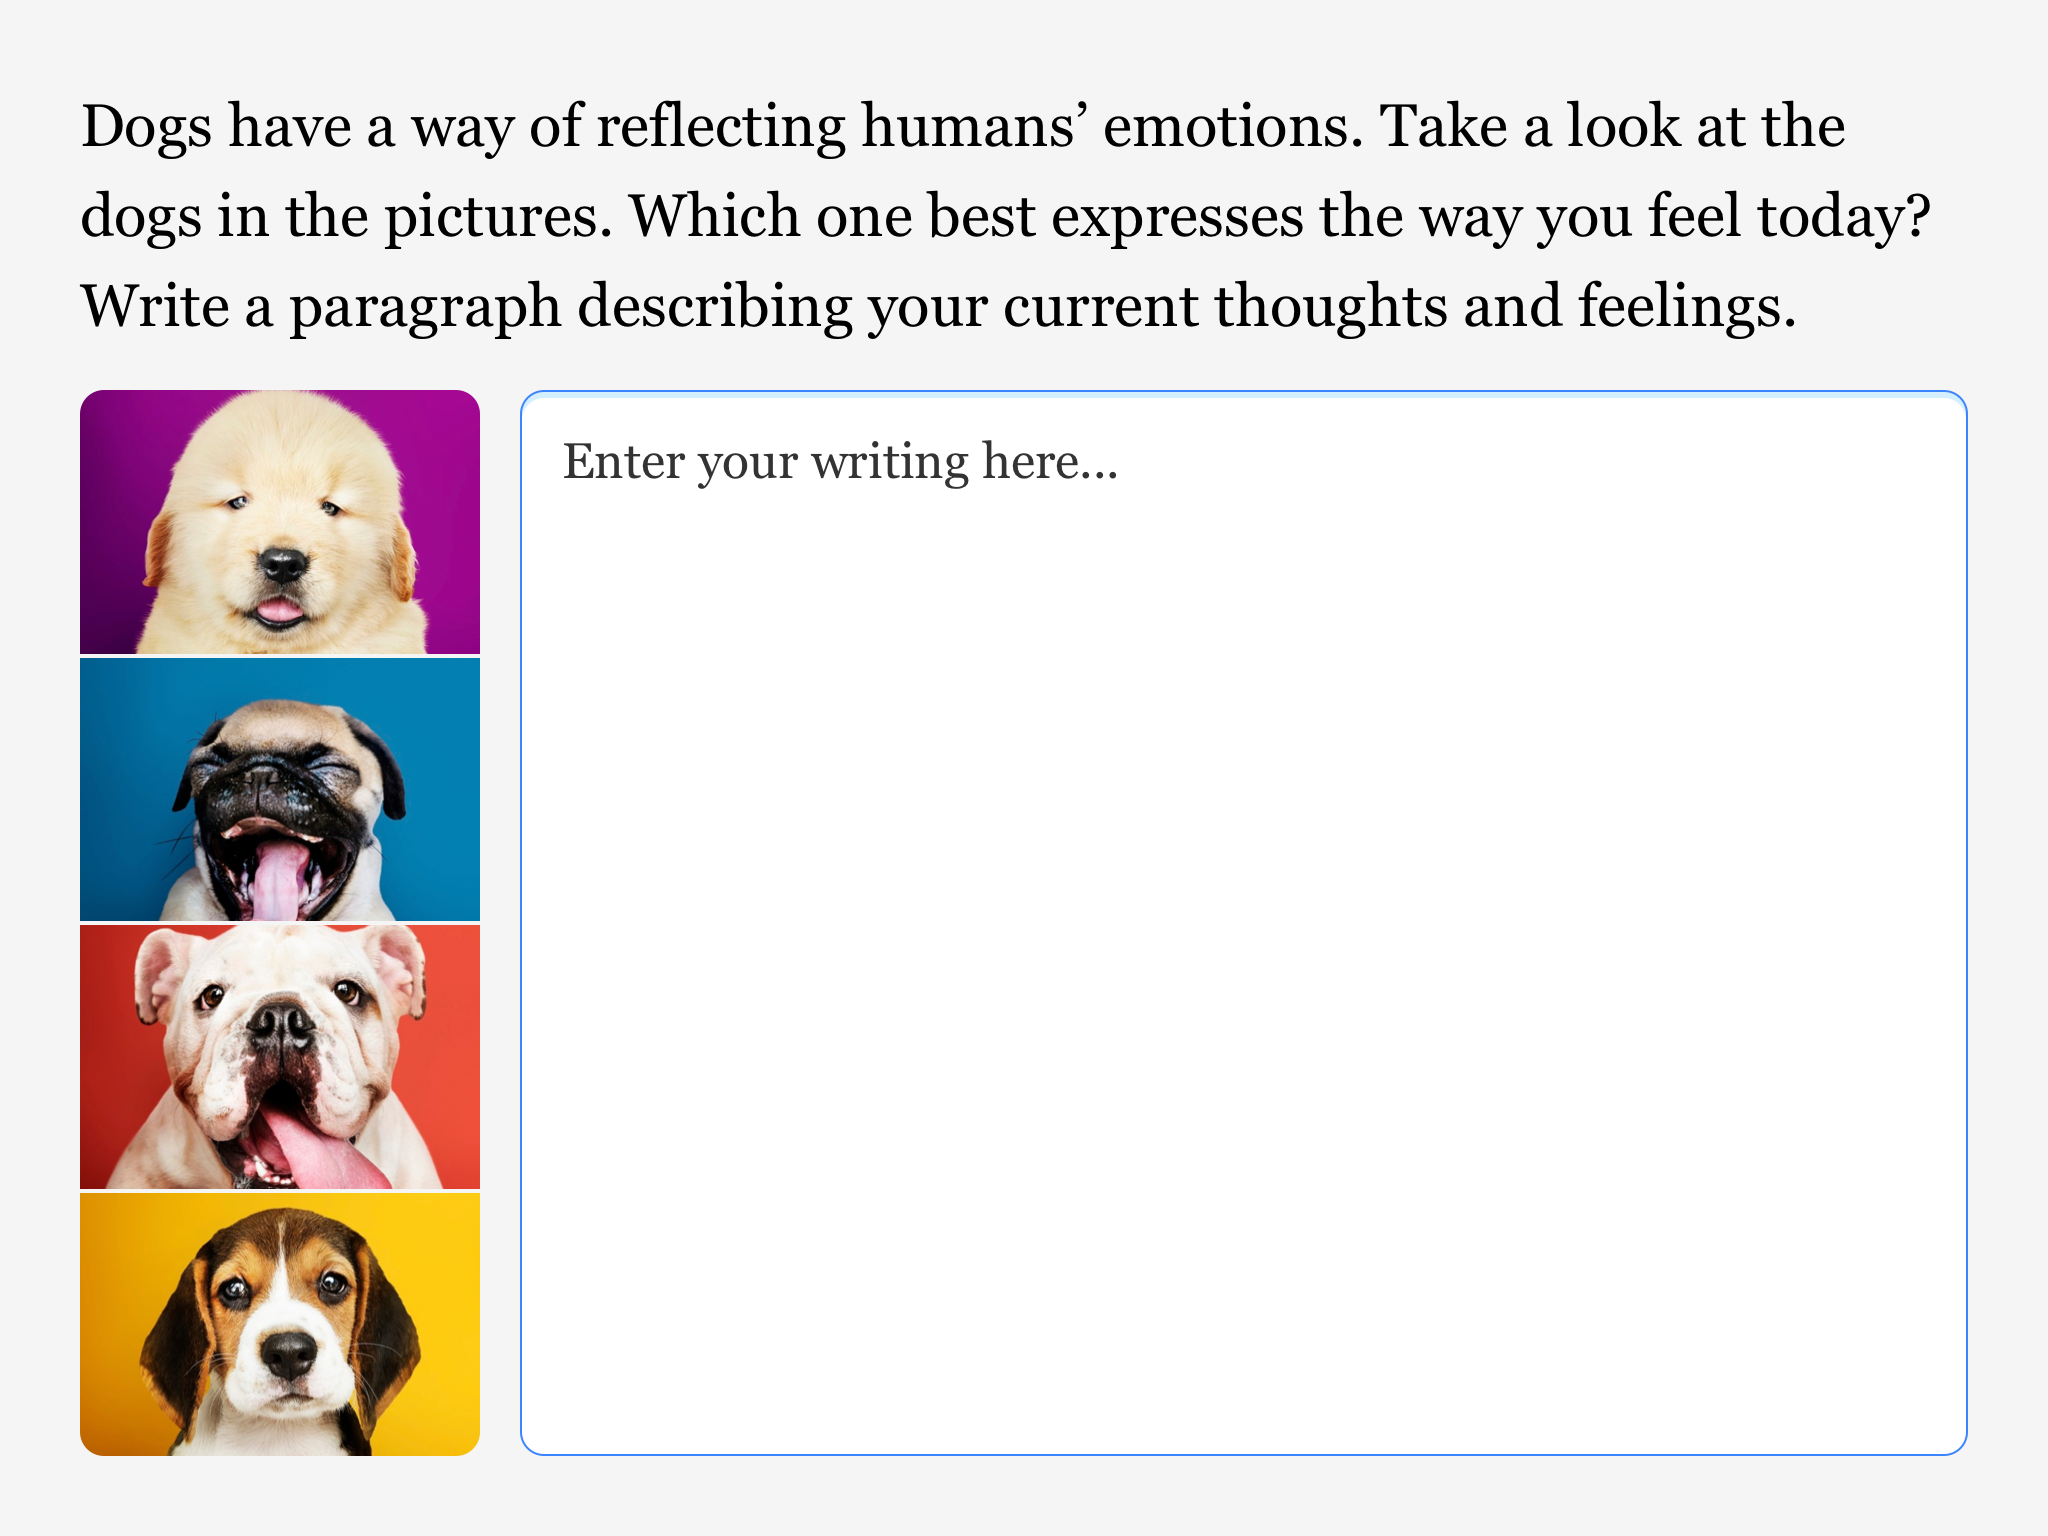 A large textbox students use to respond to the following prompt: "Dogs have a way of reflecting humans' emotions. Take a look at the dogs in the pictures. Which one best expresses the way you feel today? Write a paragraph describing your current thoughts and feelings."